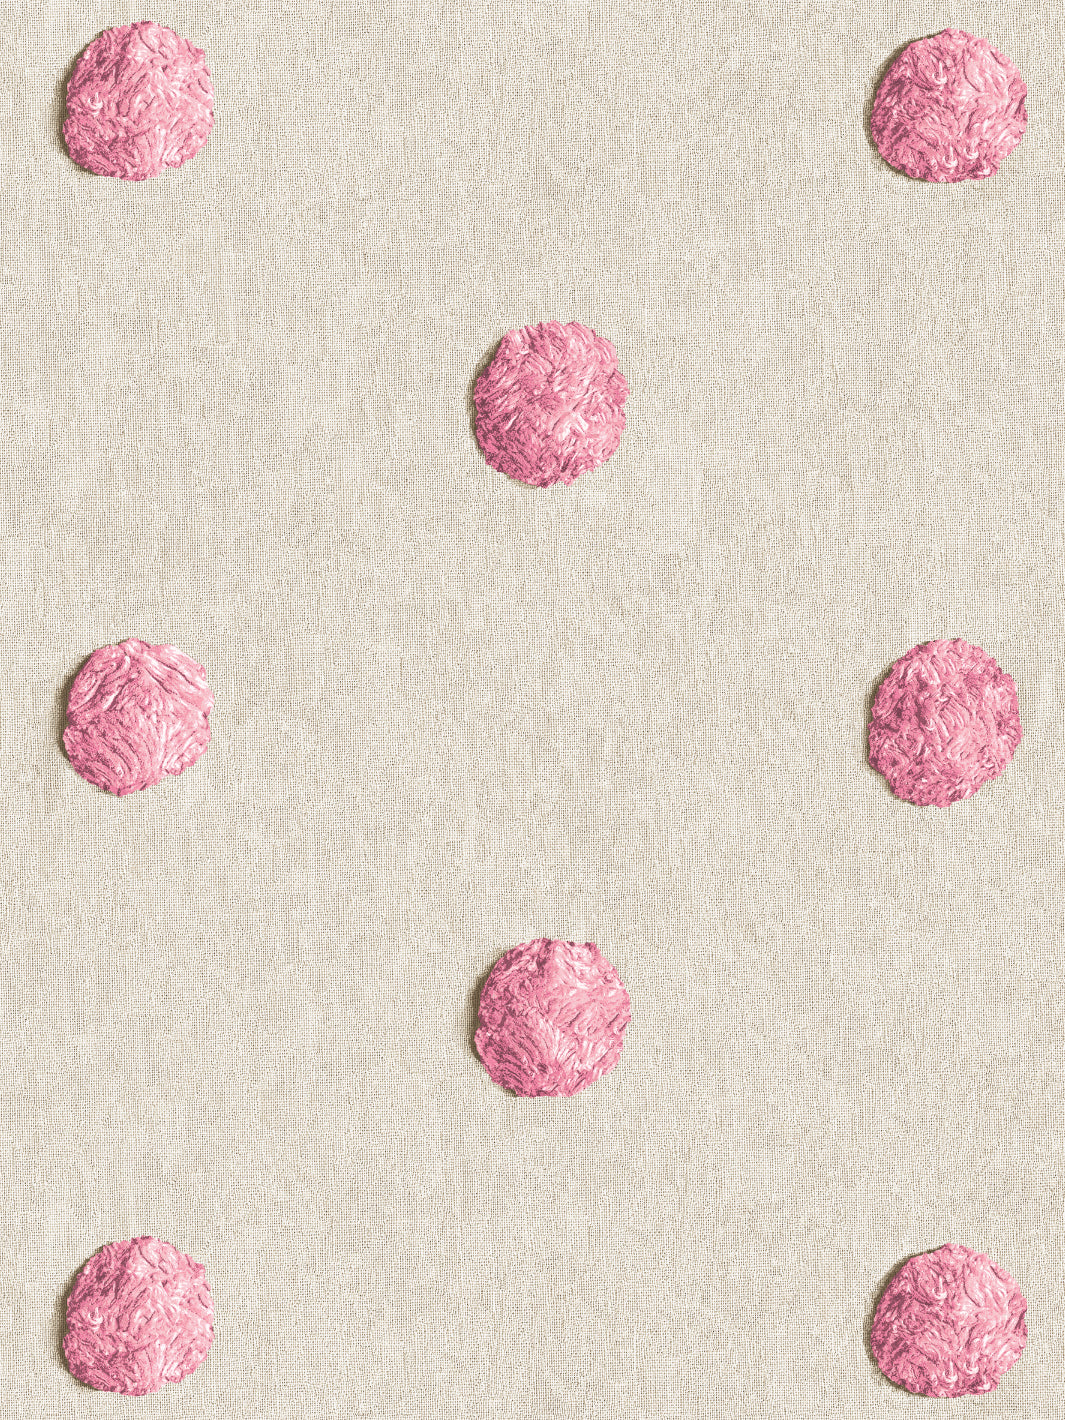 'Chenille Dots Large' Wallpaper by Chris Benz - Pink